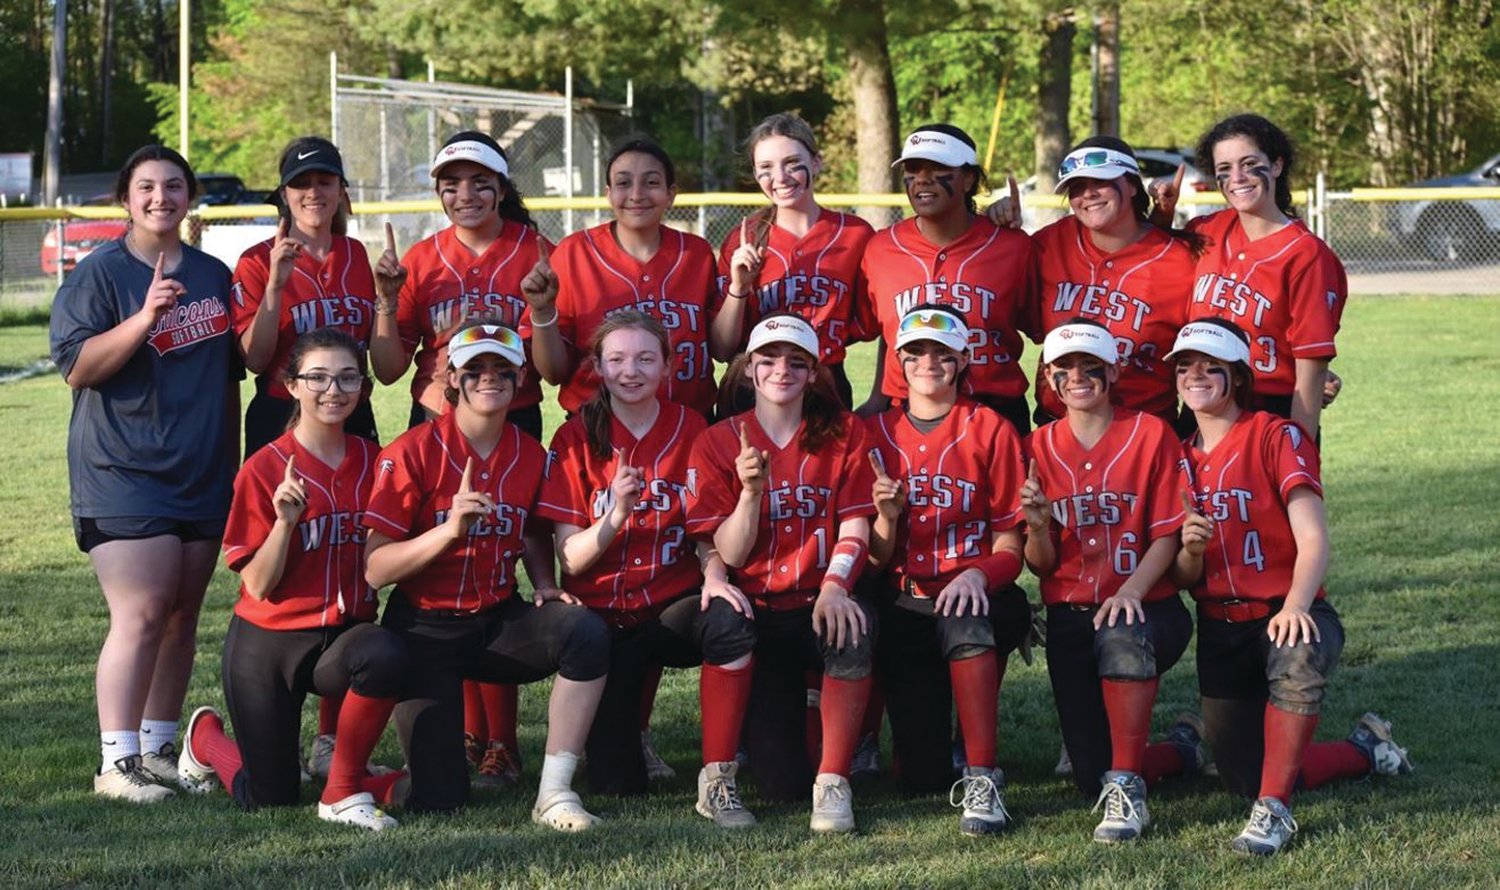 STATE CHAMPS: The Cranston West JV softball team after winning the state title. (Submitted photo)